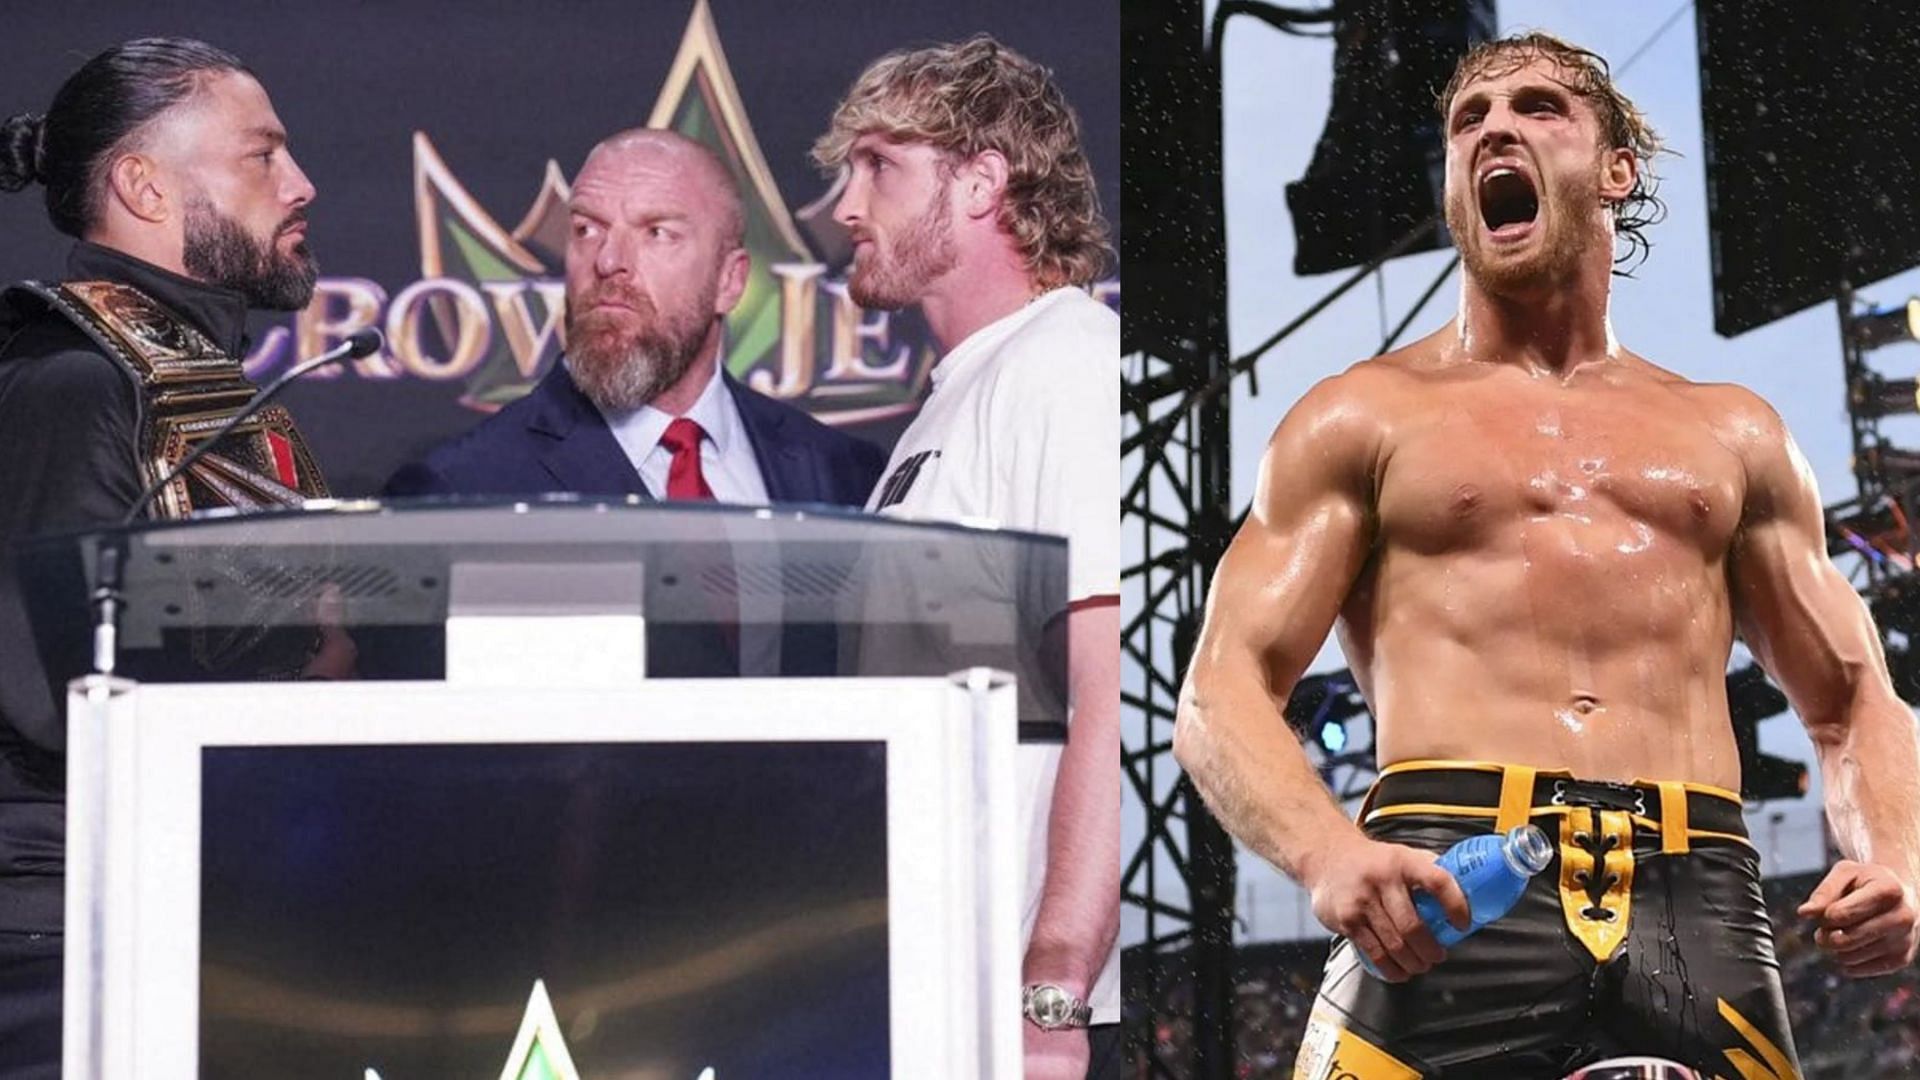 Roman Reigns and Logan Paul will square off at Crown Jewel